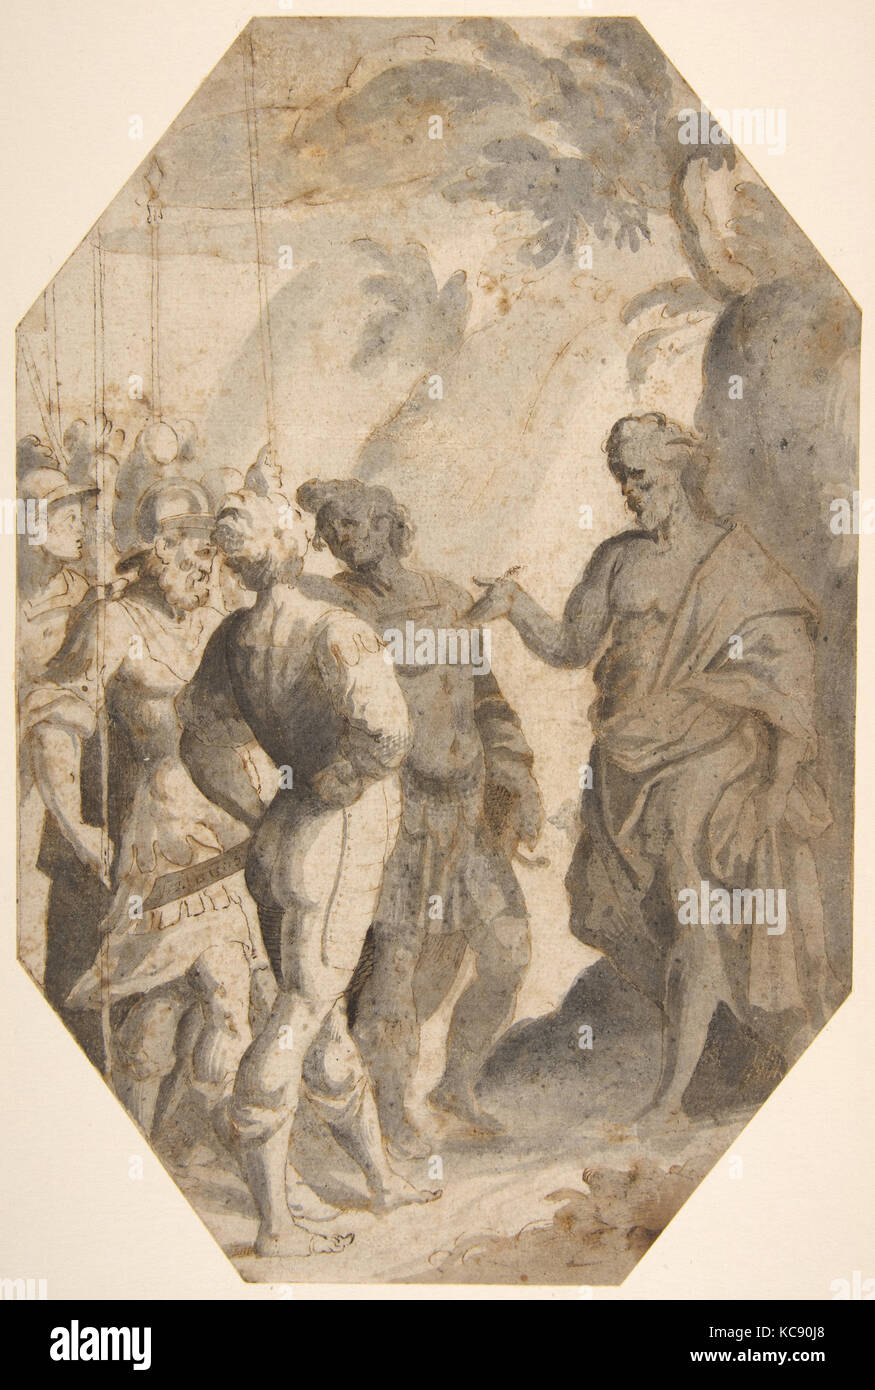 Saint John the Baptist (?) Preaching to a Group of Soldiers, Giovanni Battista Trotti, 16th century Stock Photo